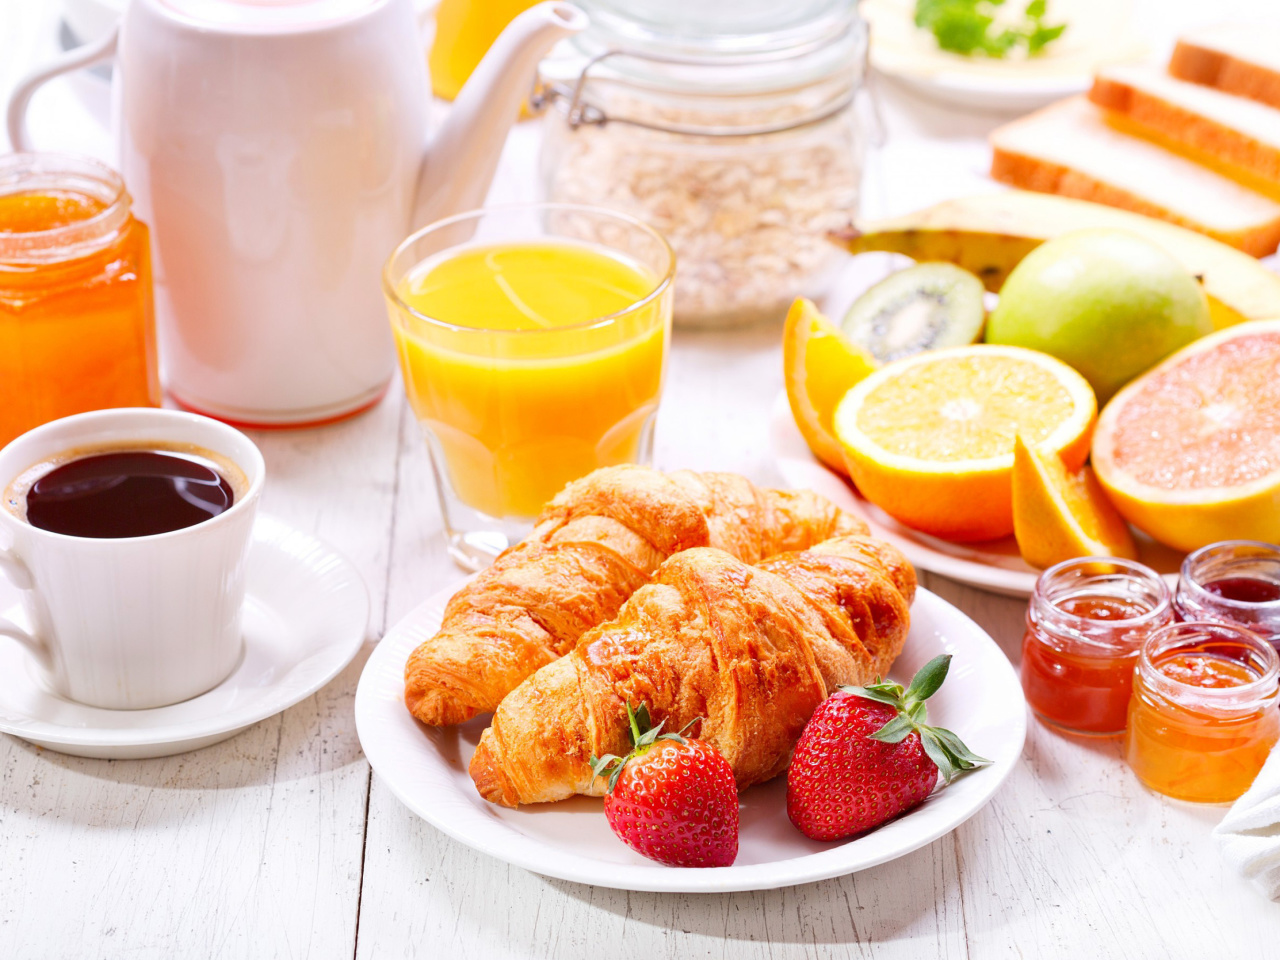 Breakfast with croissants and fruit wallpaper 1280x960